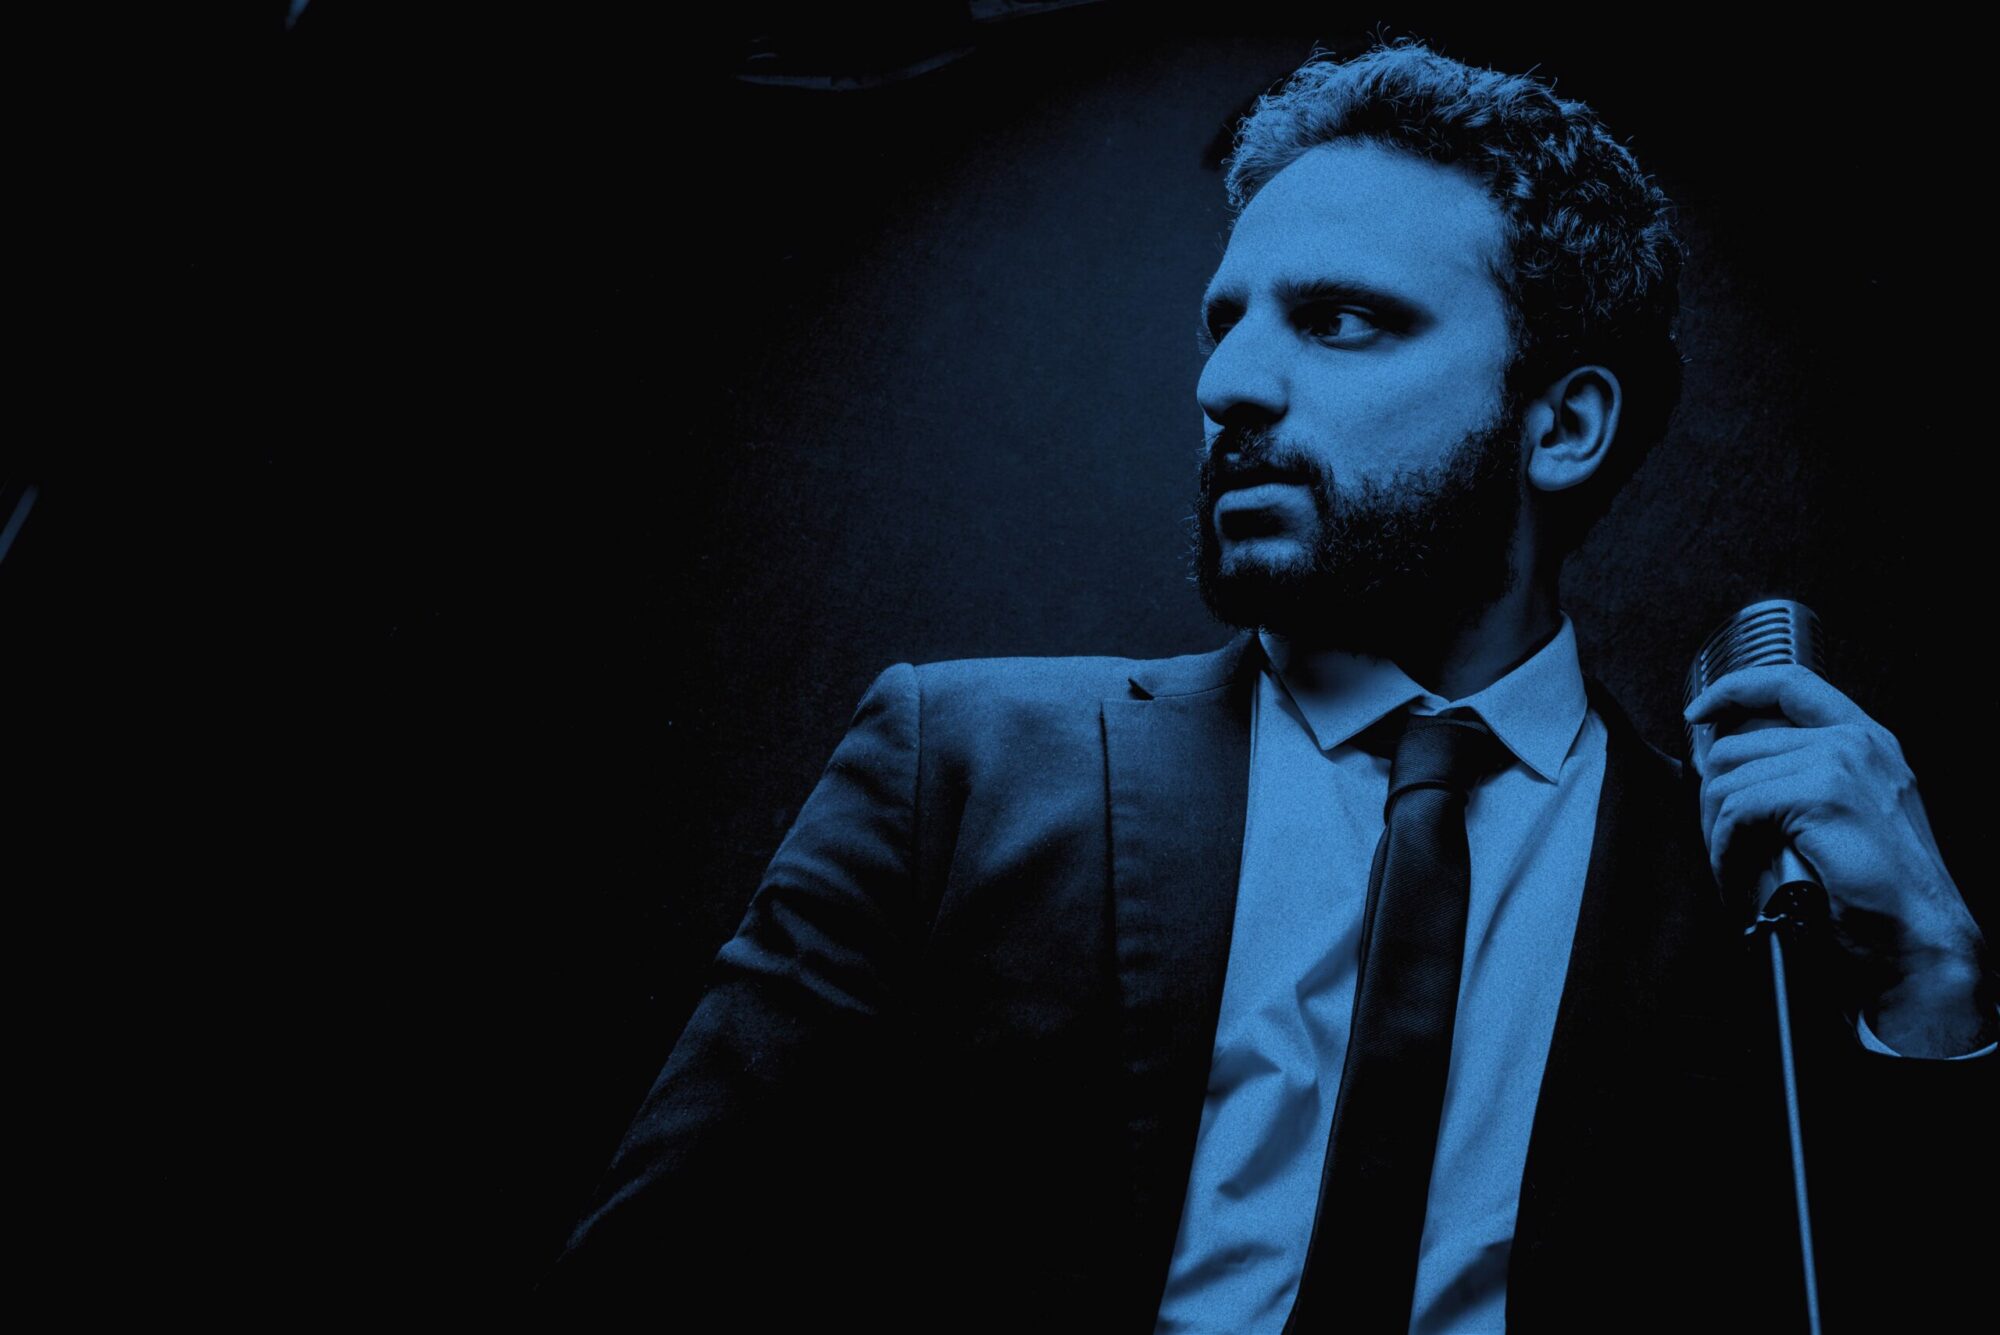 Image name Nish Kumar at Leadmill Sheffield scaled the 8 image from the post Nish Kumar: Nish, Don't Kill My Vibe at Scarborough Spa Theatre, Scarborough in Yorkshire.com.